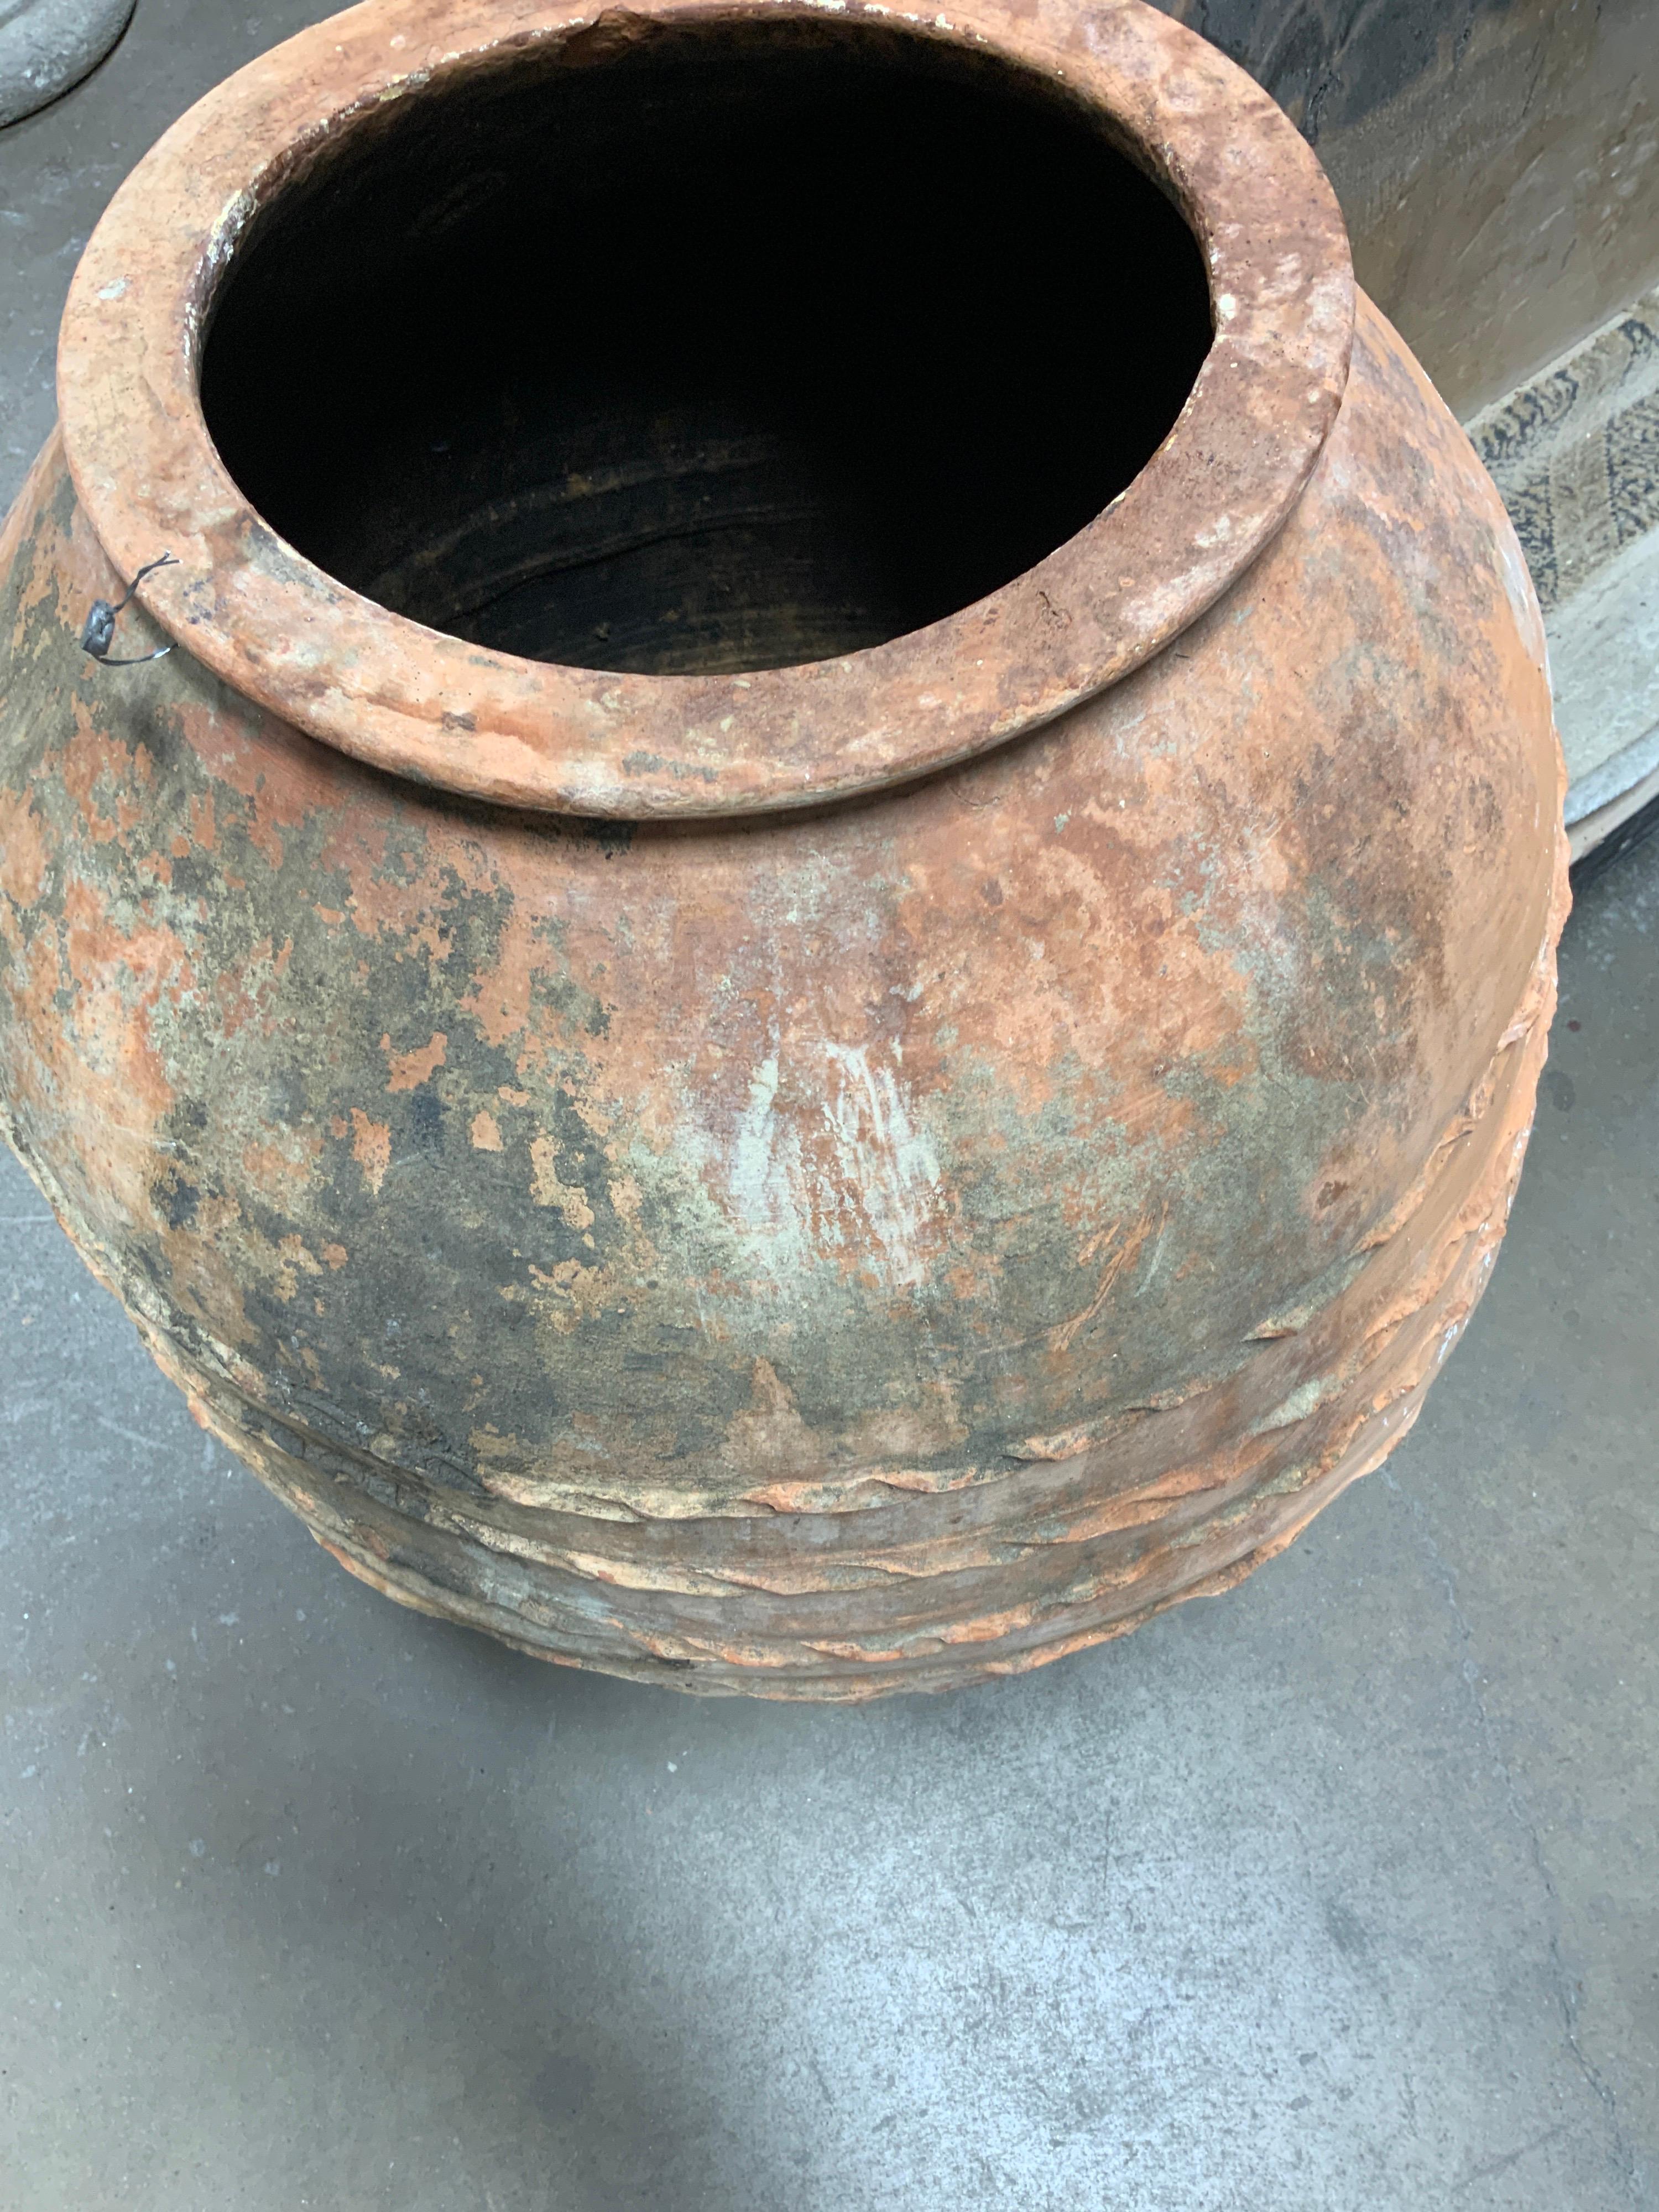 Beautiful large vessel, originates from Greece. Item dates back to 1890s.